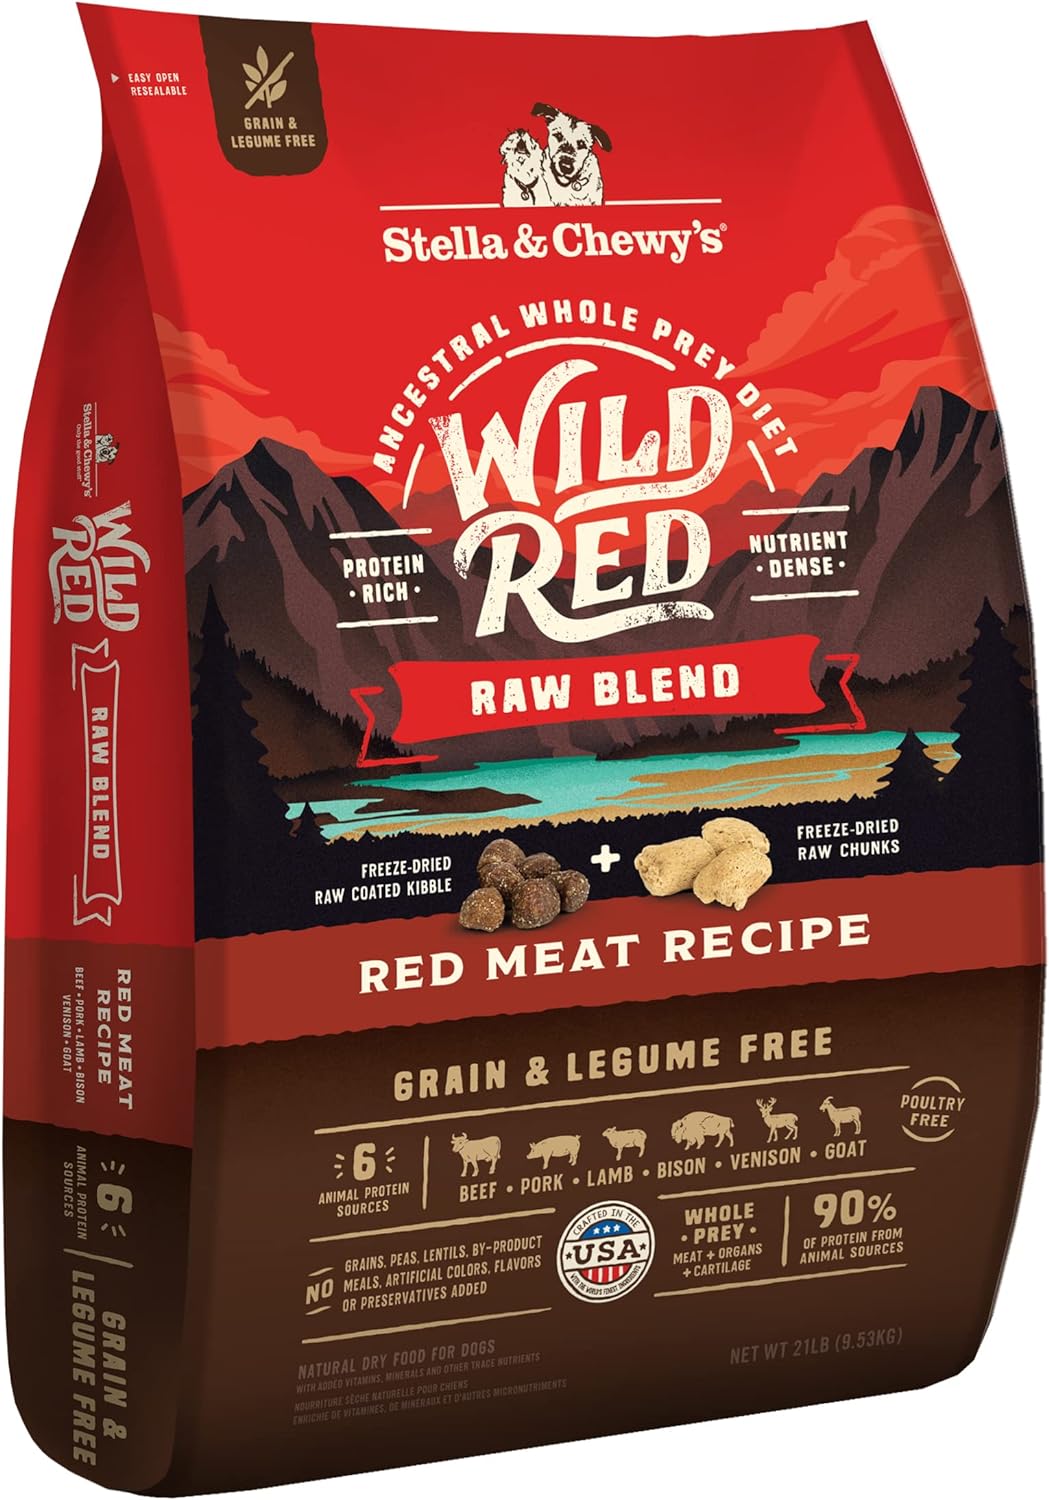 Stella & Chewy's Wild Red Dry Dog Food Raw Blend High Protein Grain & Legume Free Red Meat Recipe, 21 lb. Bag